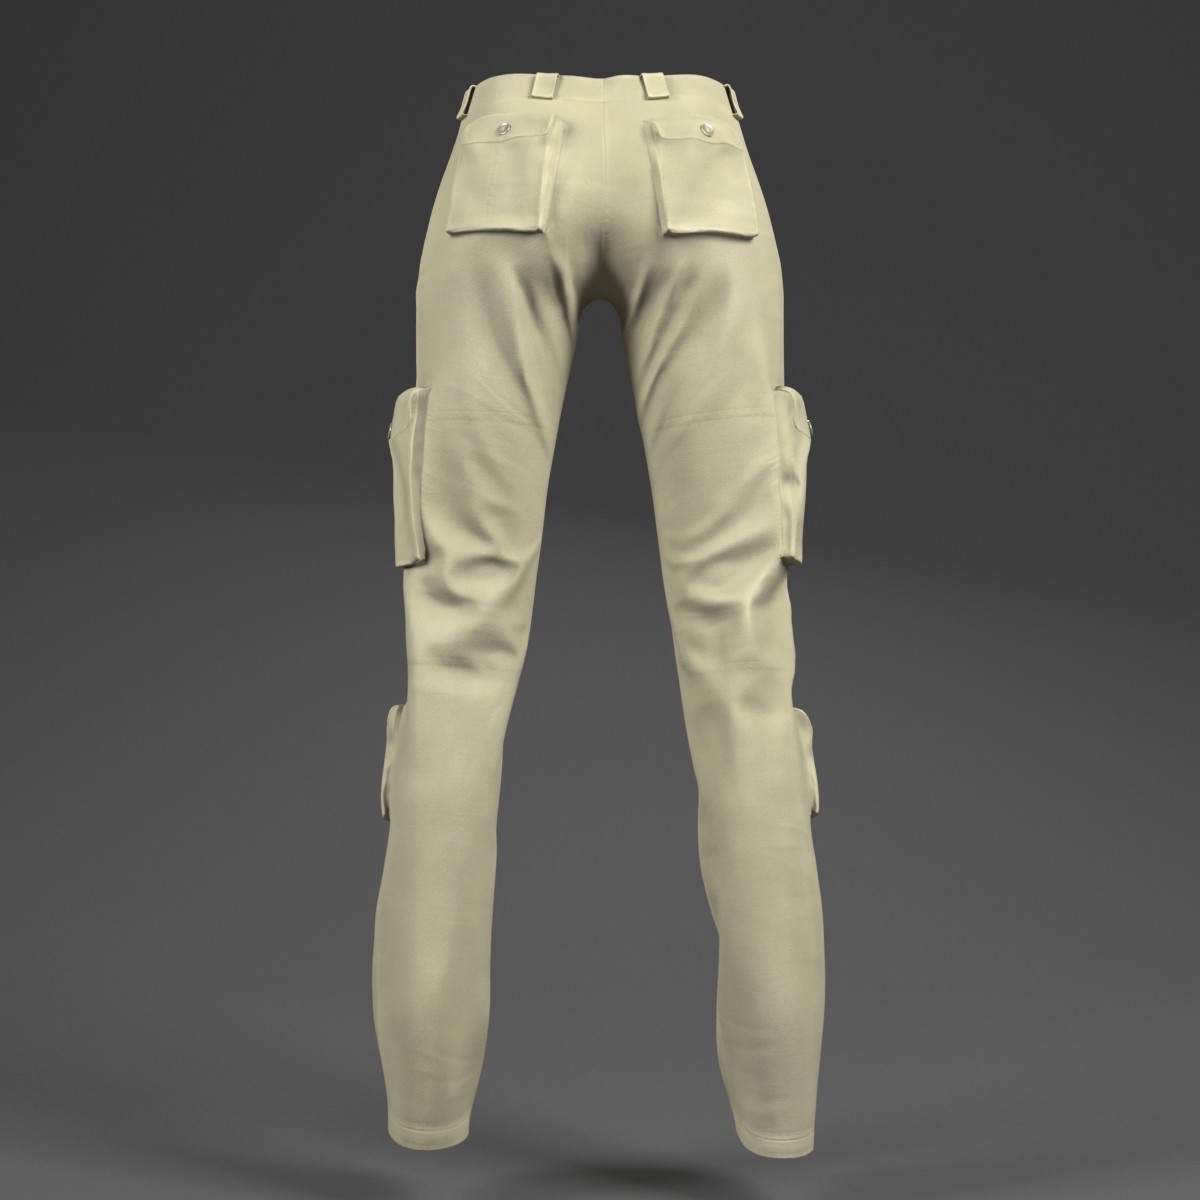 ArtStation - Pants ( For Woman, PBR, Lowpoly, Max, FBX) | Resources